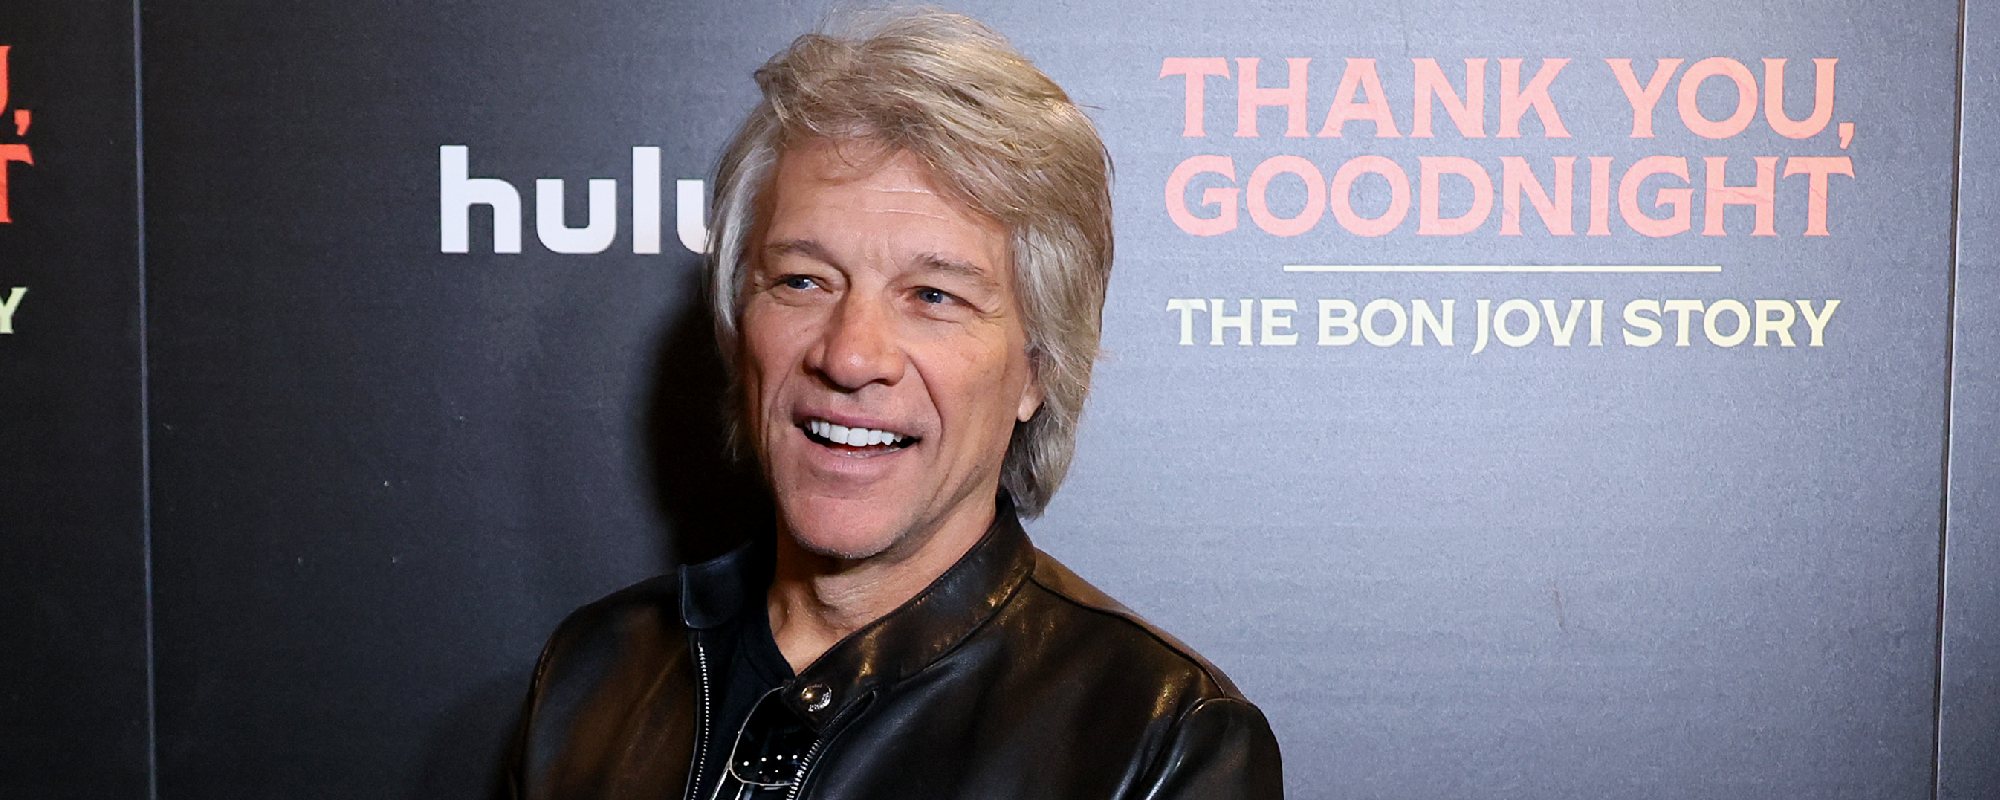 Jon Bon Jovi Gets Real on Working With Richie Sambora Again: “It’s Been 11 Years and I’m Still Waiting for the Phone Call”